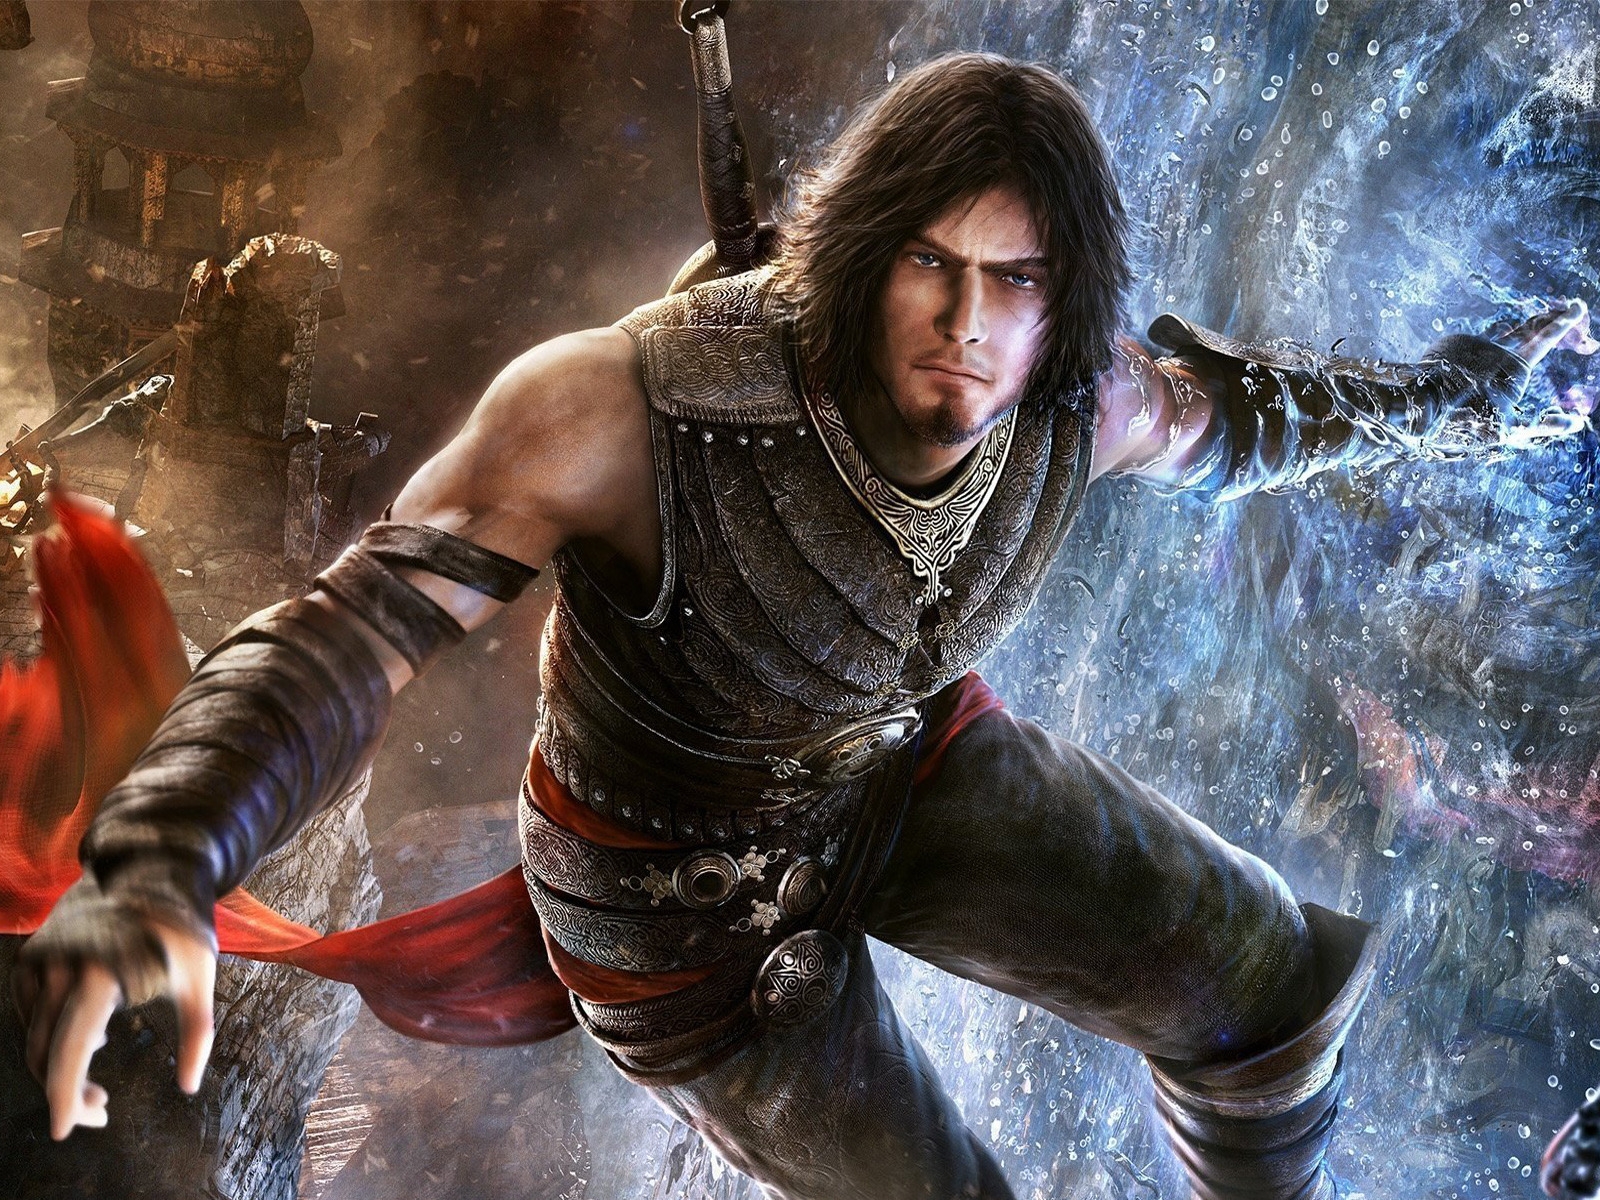 Prince of Persia Character for 1600 x 1200 resolution